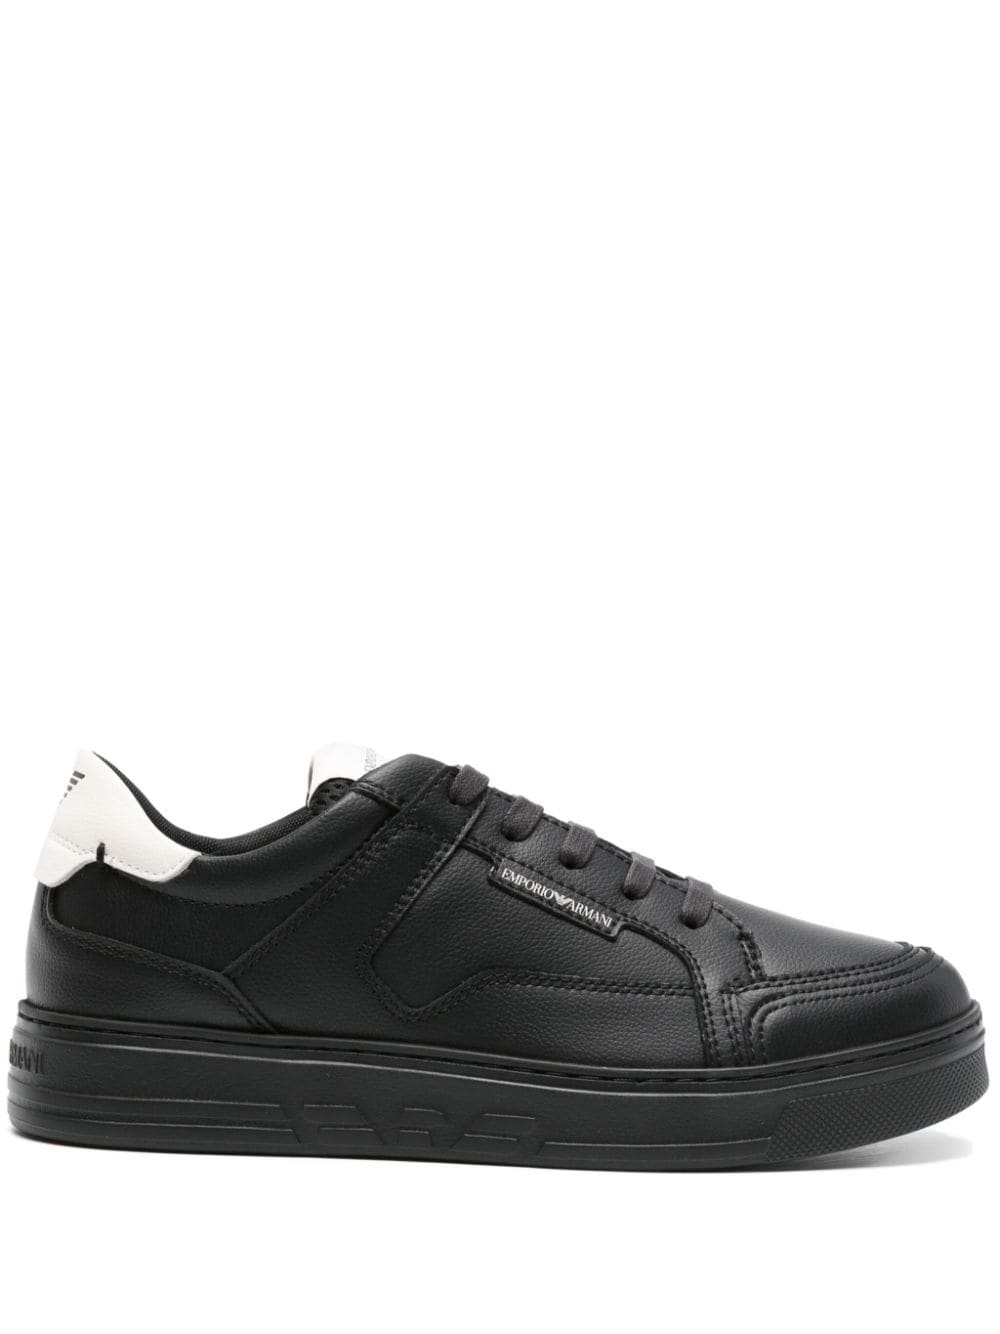 Emporio Armani lace-up leather sneakers - Schwarz